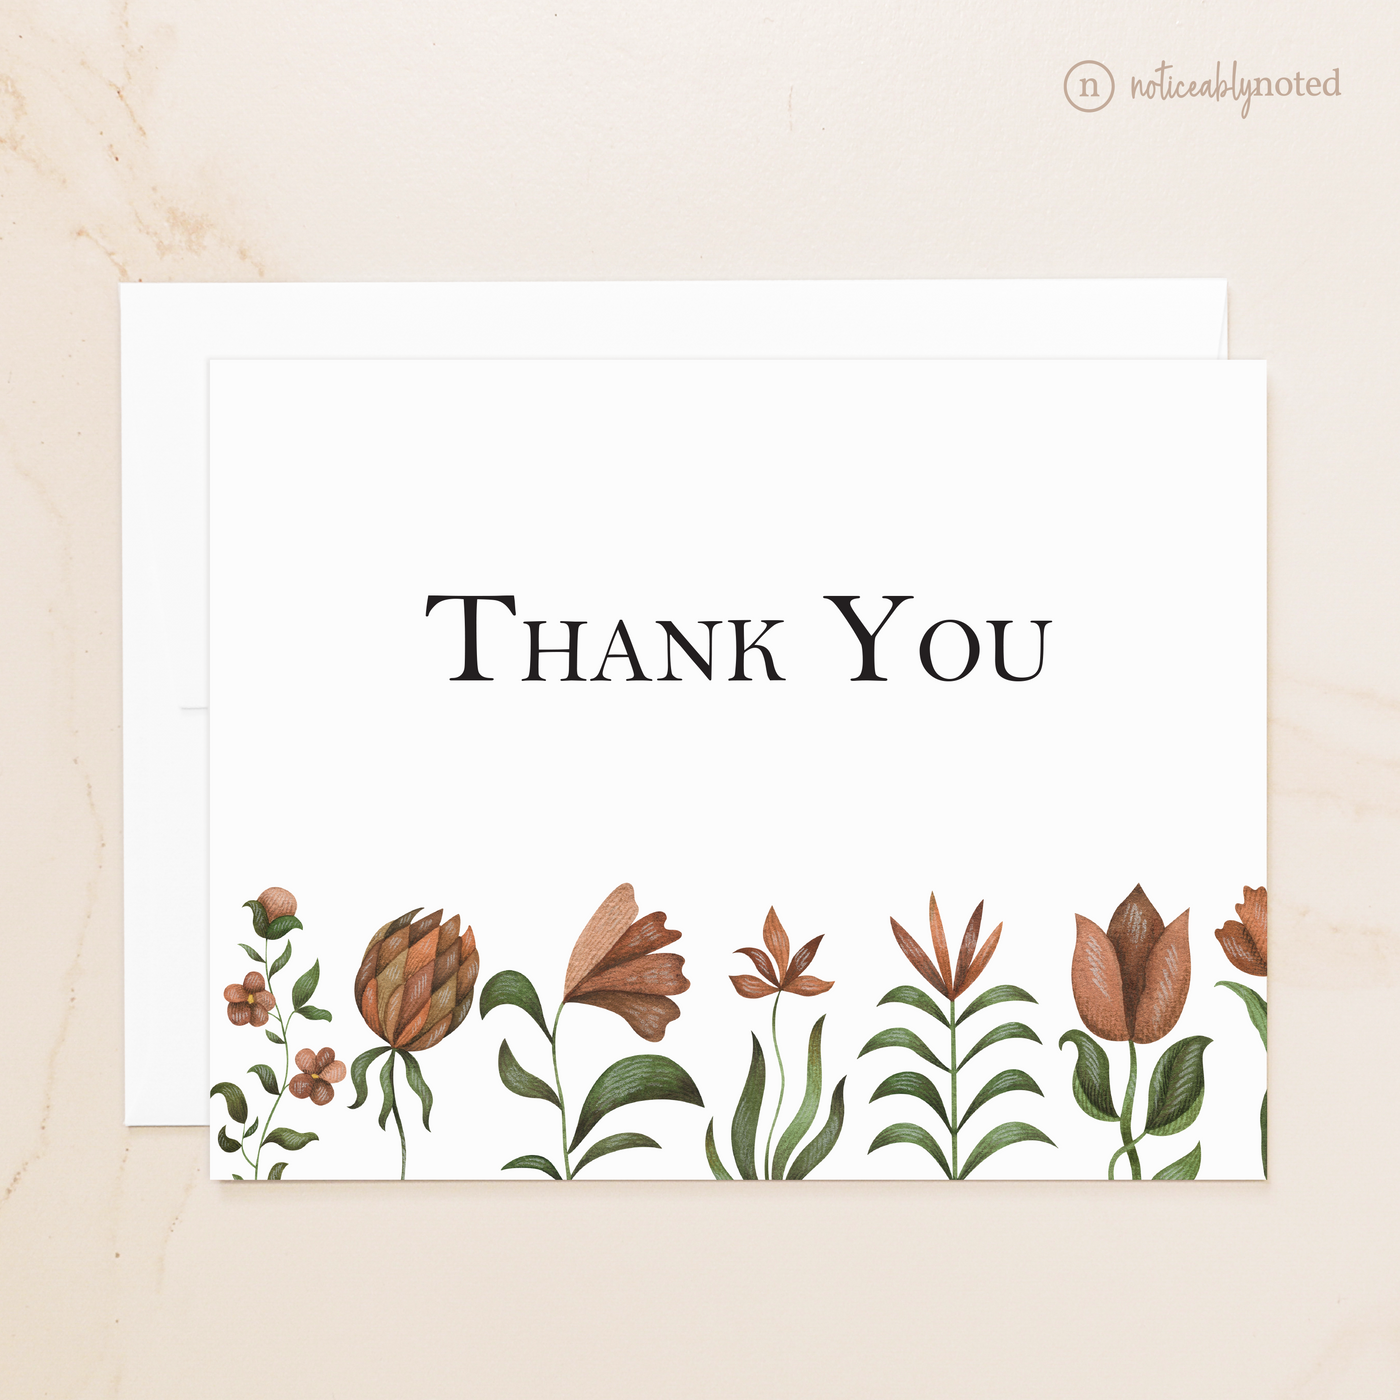 Vintage Floral Thank You Cards | Noticeably Noted